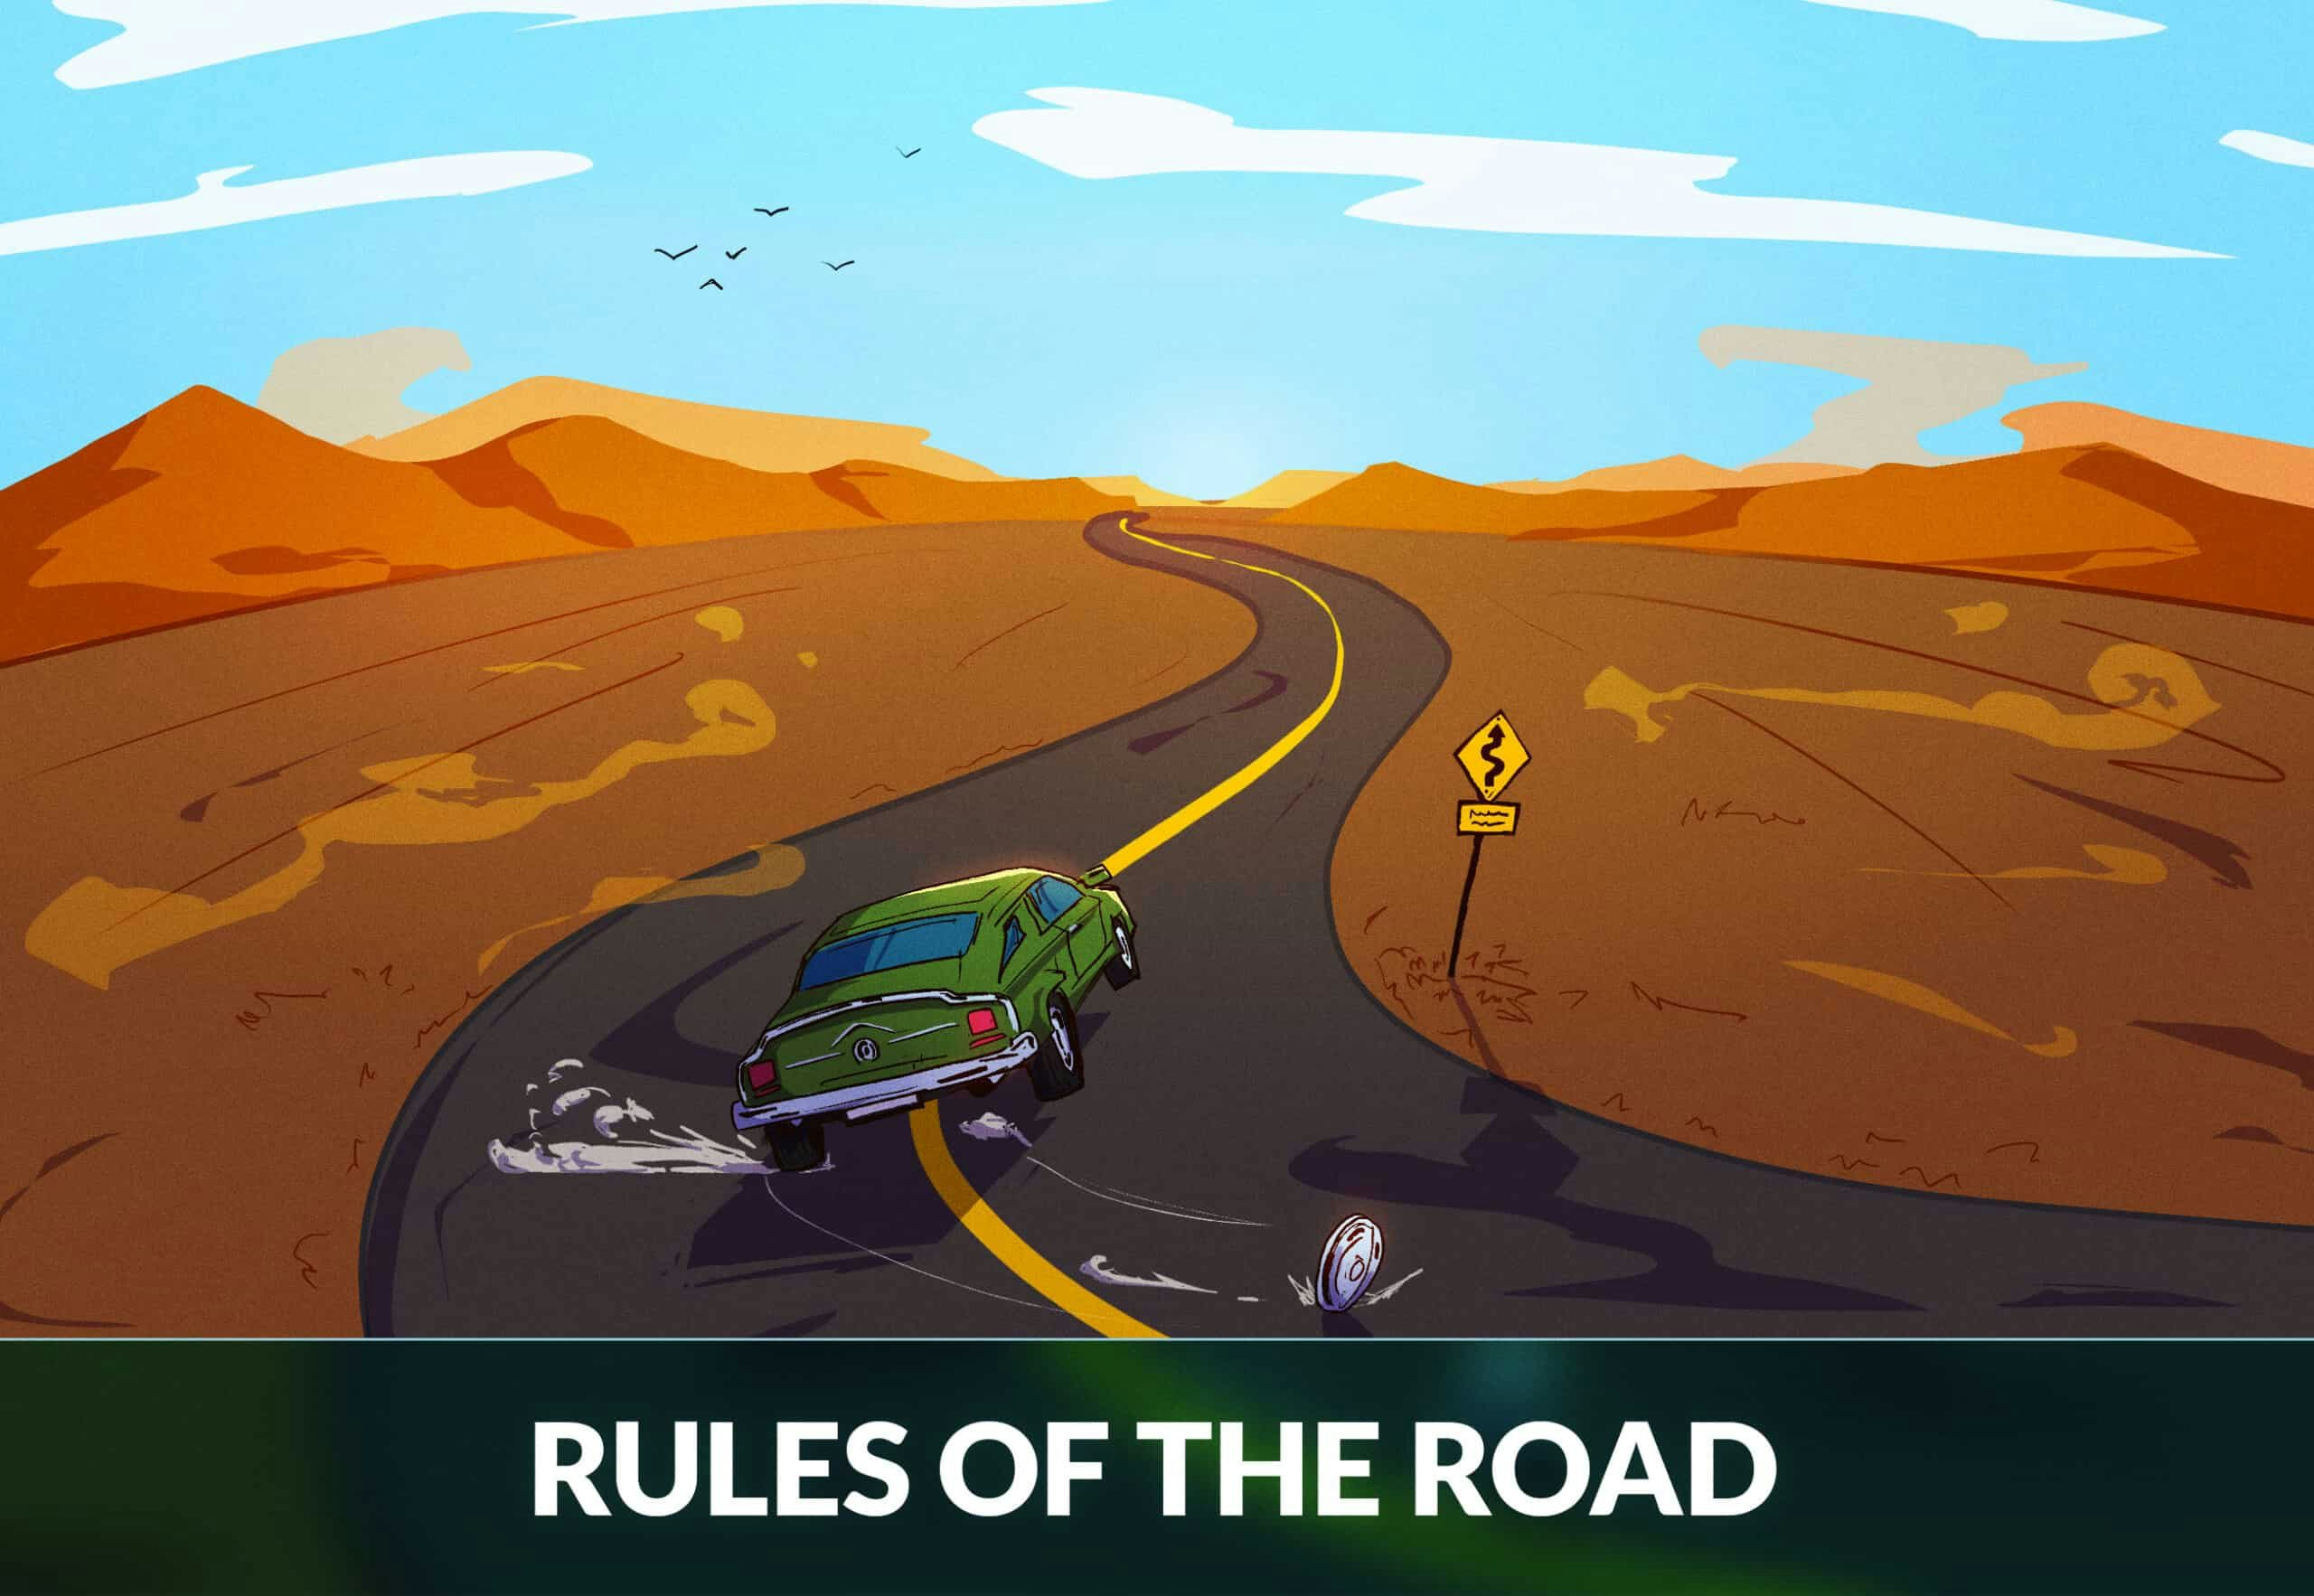 RULES OF THE ROAD